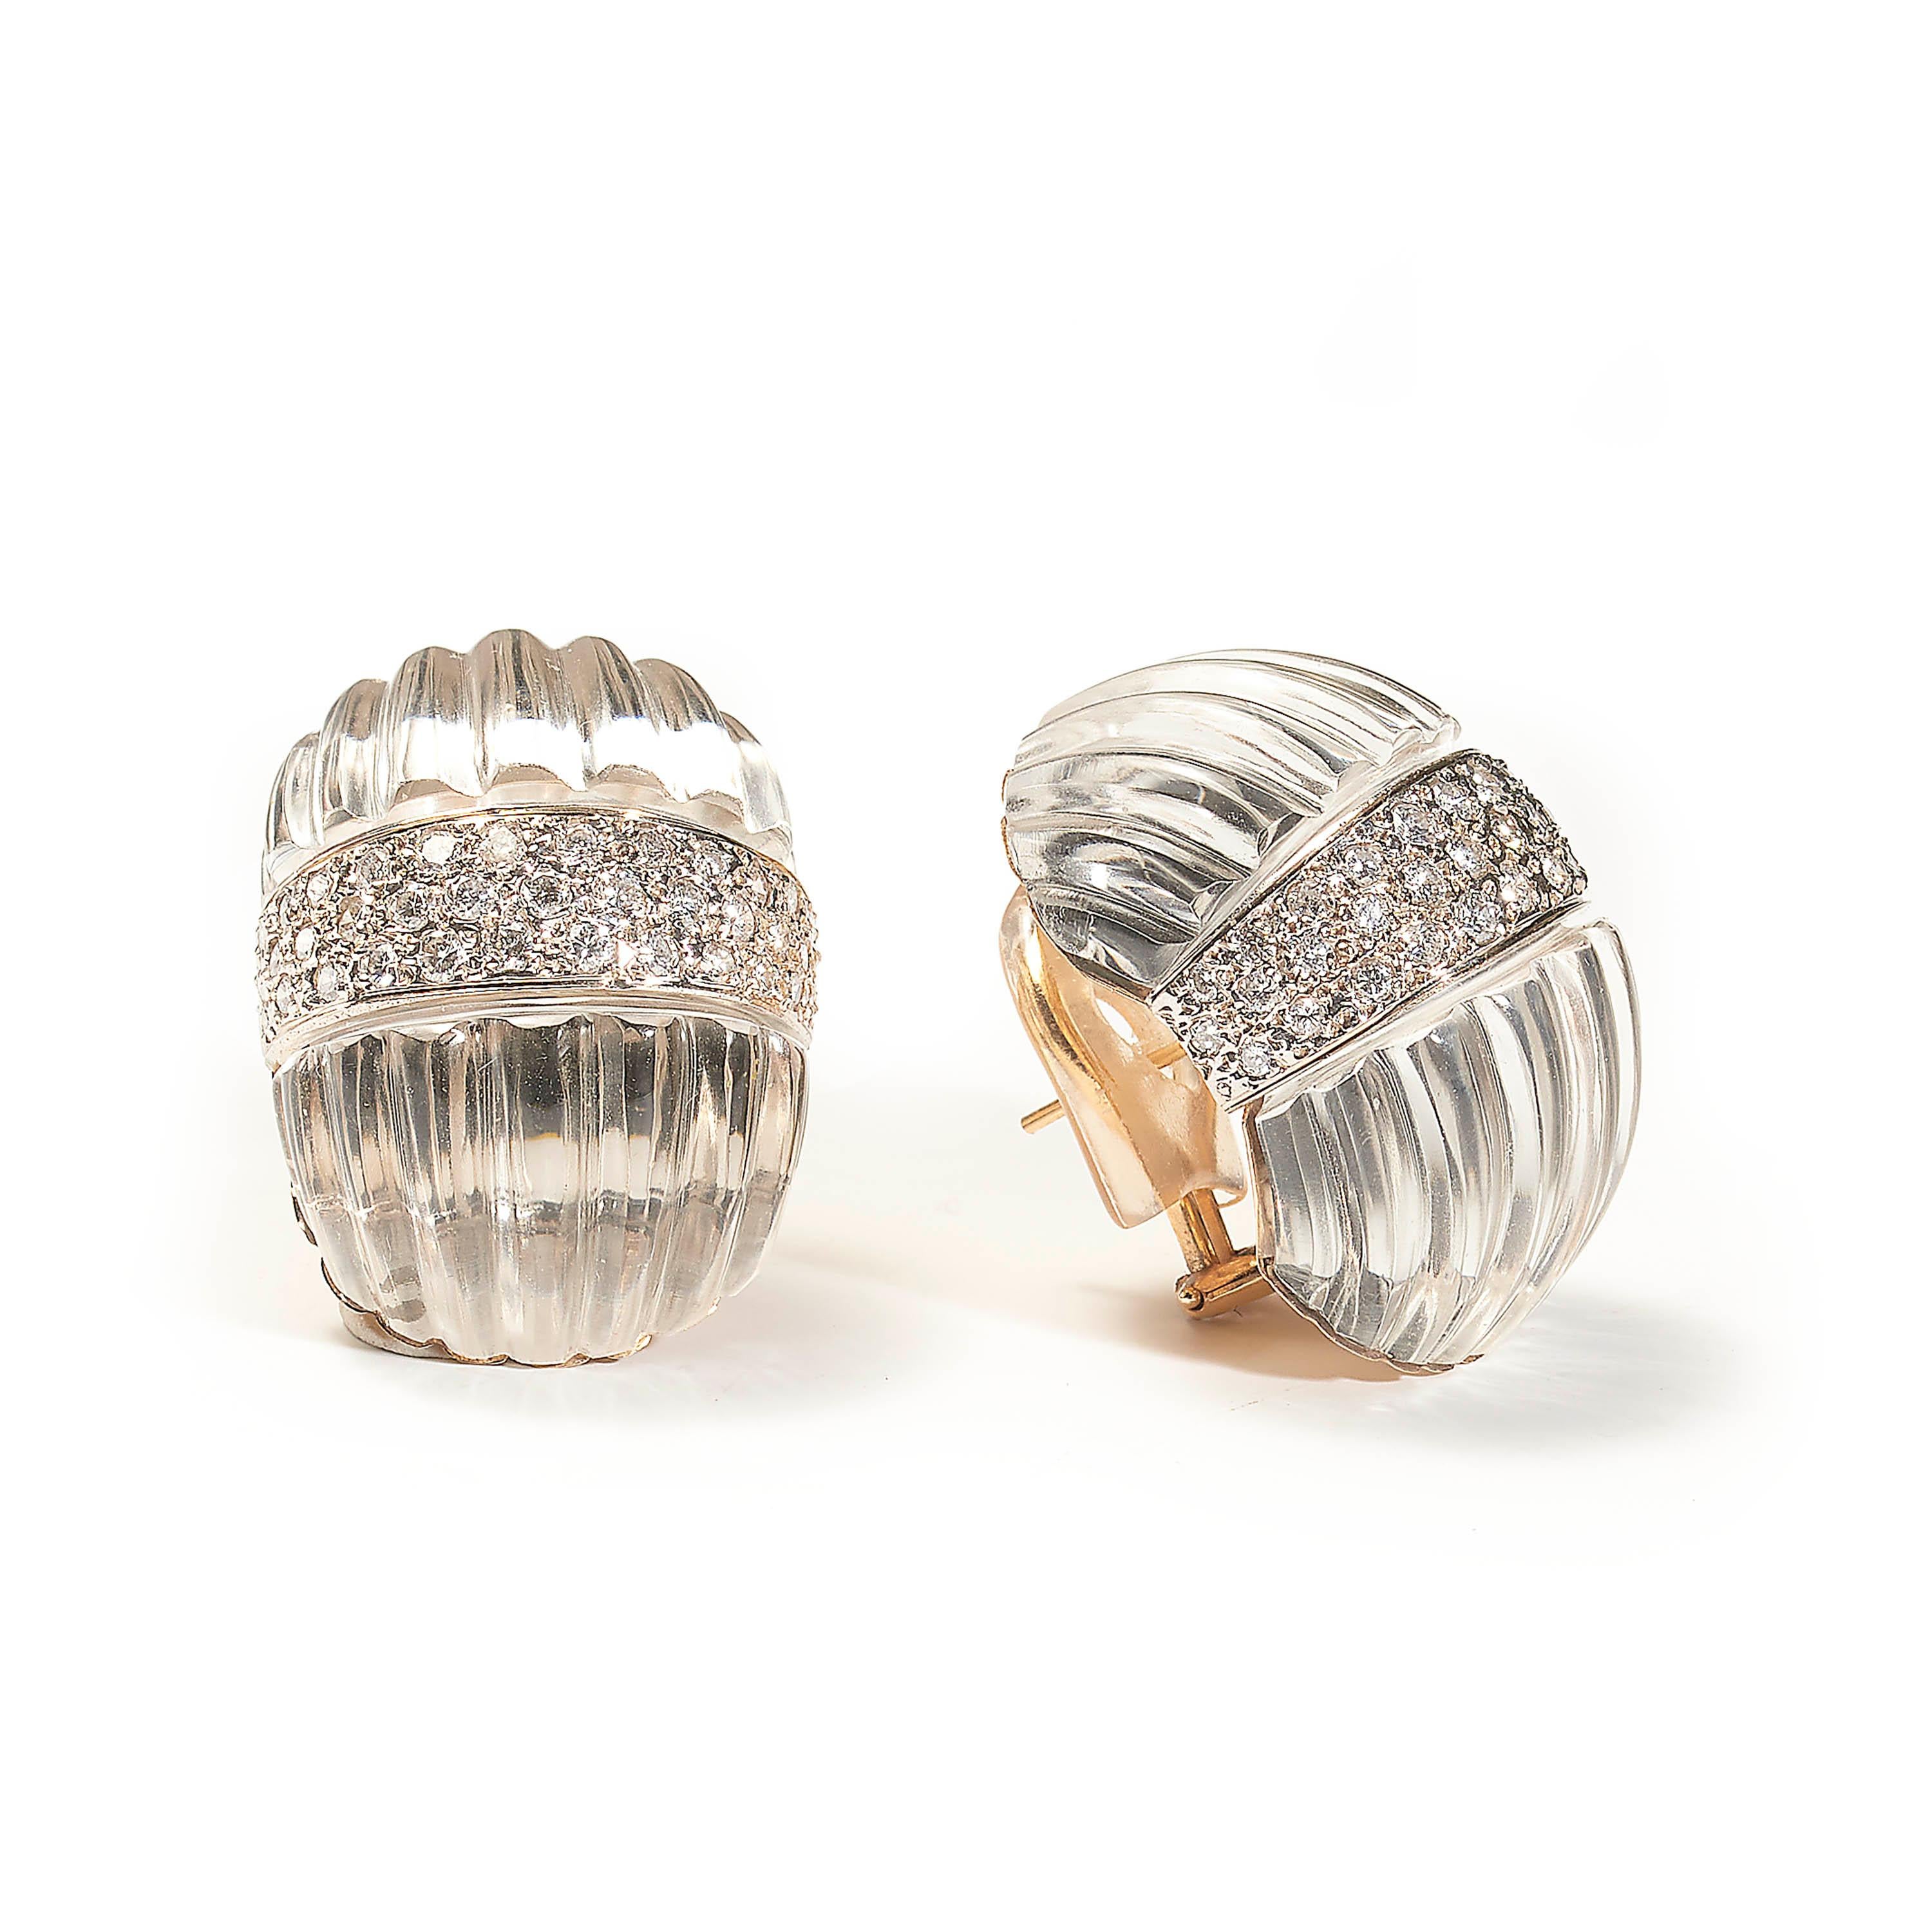 A pair of modern rock crystal and diamond earrings by Maz, comprised of two fluted sections of rock crystal, flanking a central band of pavé set brilliant-cut diamonds, weighing an estimated total of 2.25 carats, with posts and hinged clip fittings,